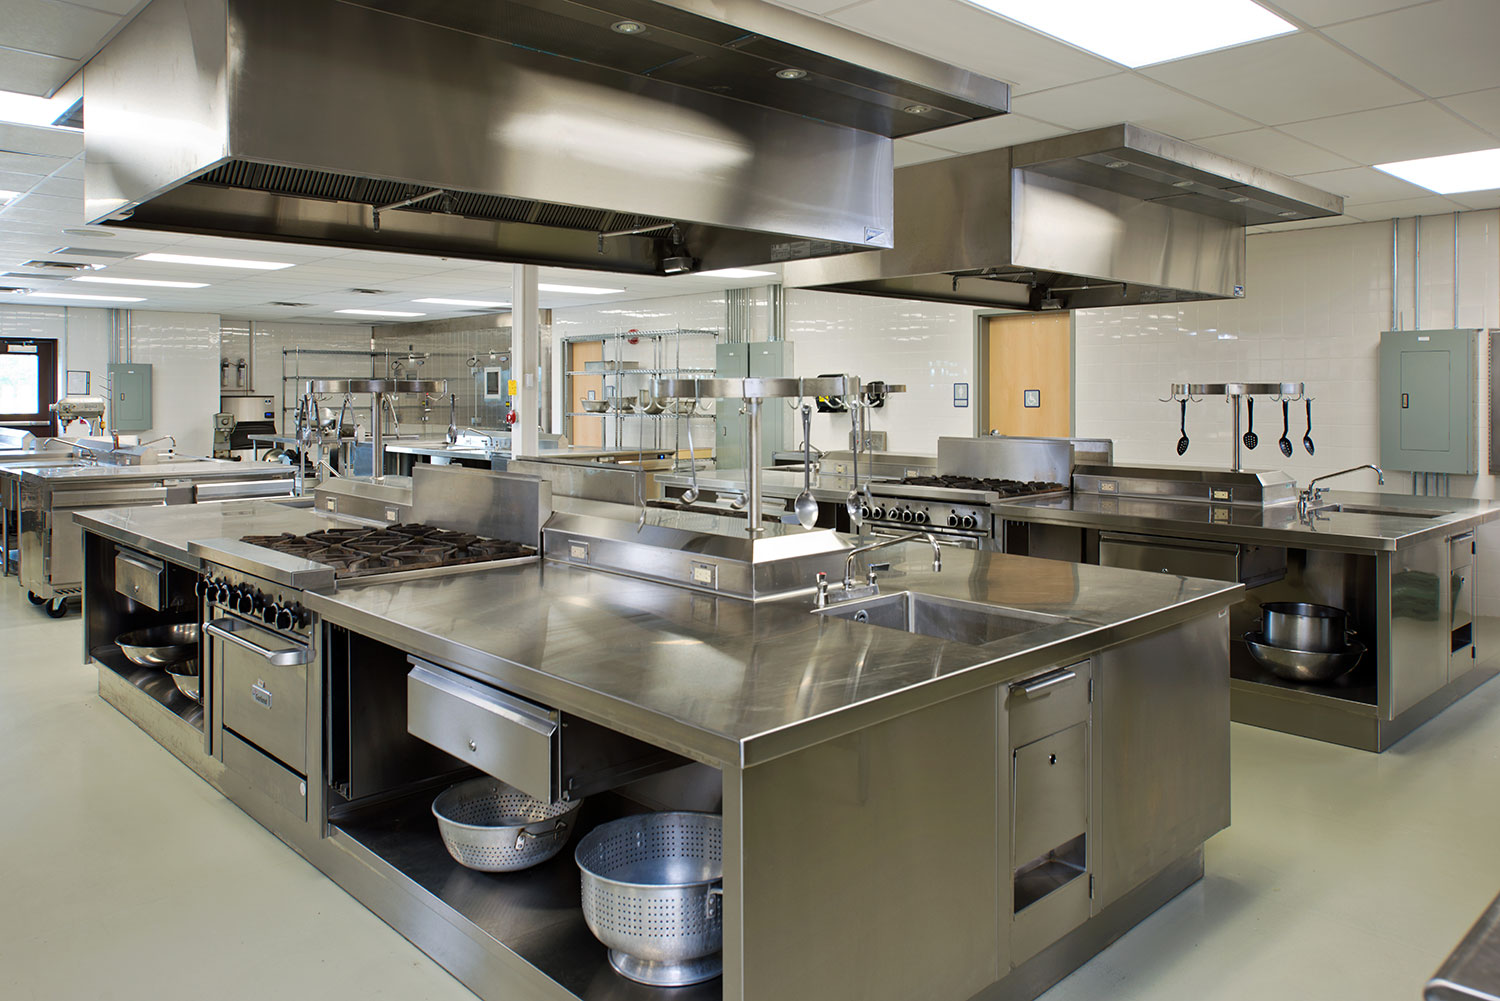 Multi-occupational teaching areas design by Mosaic for CiTi BOCES include a teaching kitchen.